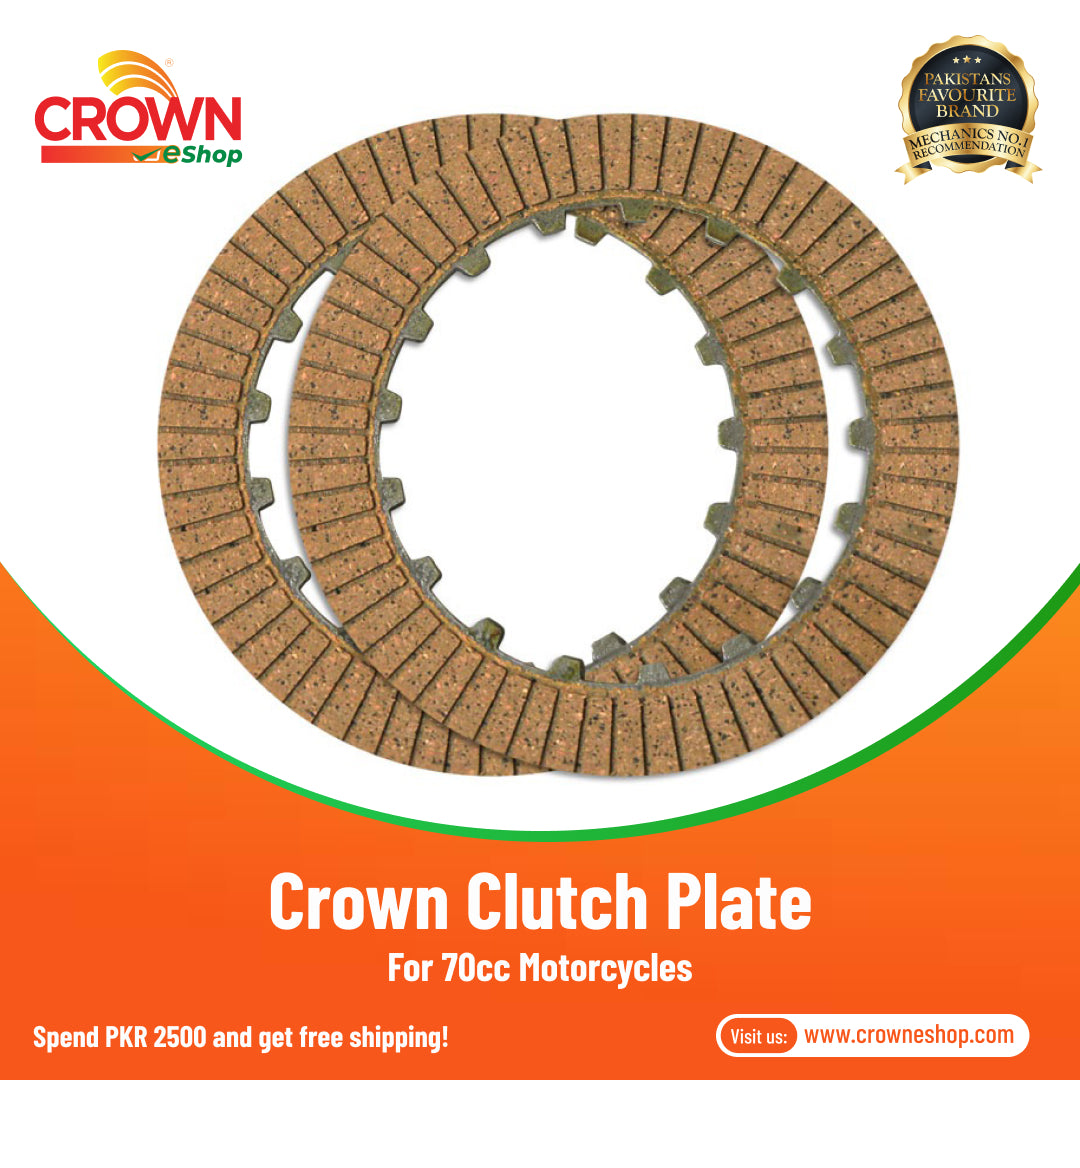 Crown Clutch Plate for 70cc Motorcycles - Crowneshop